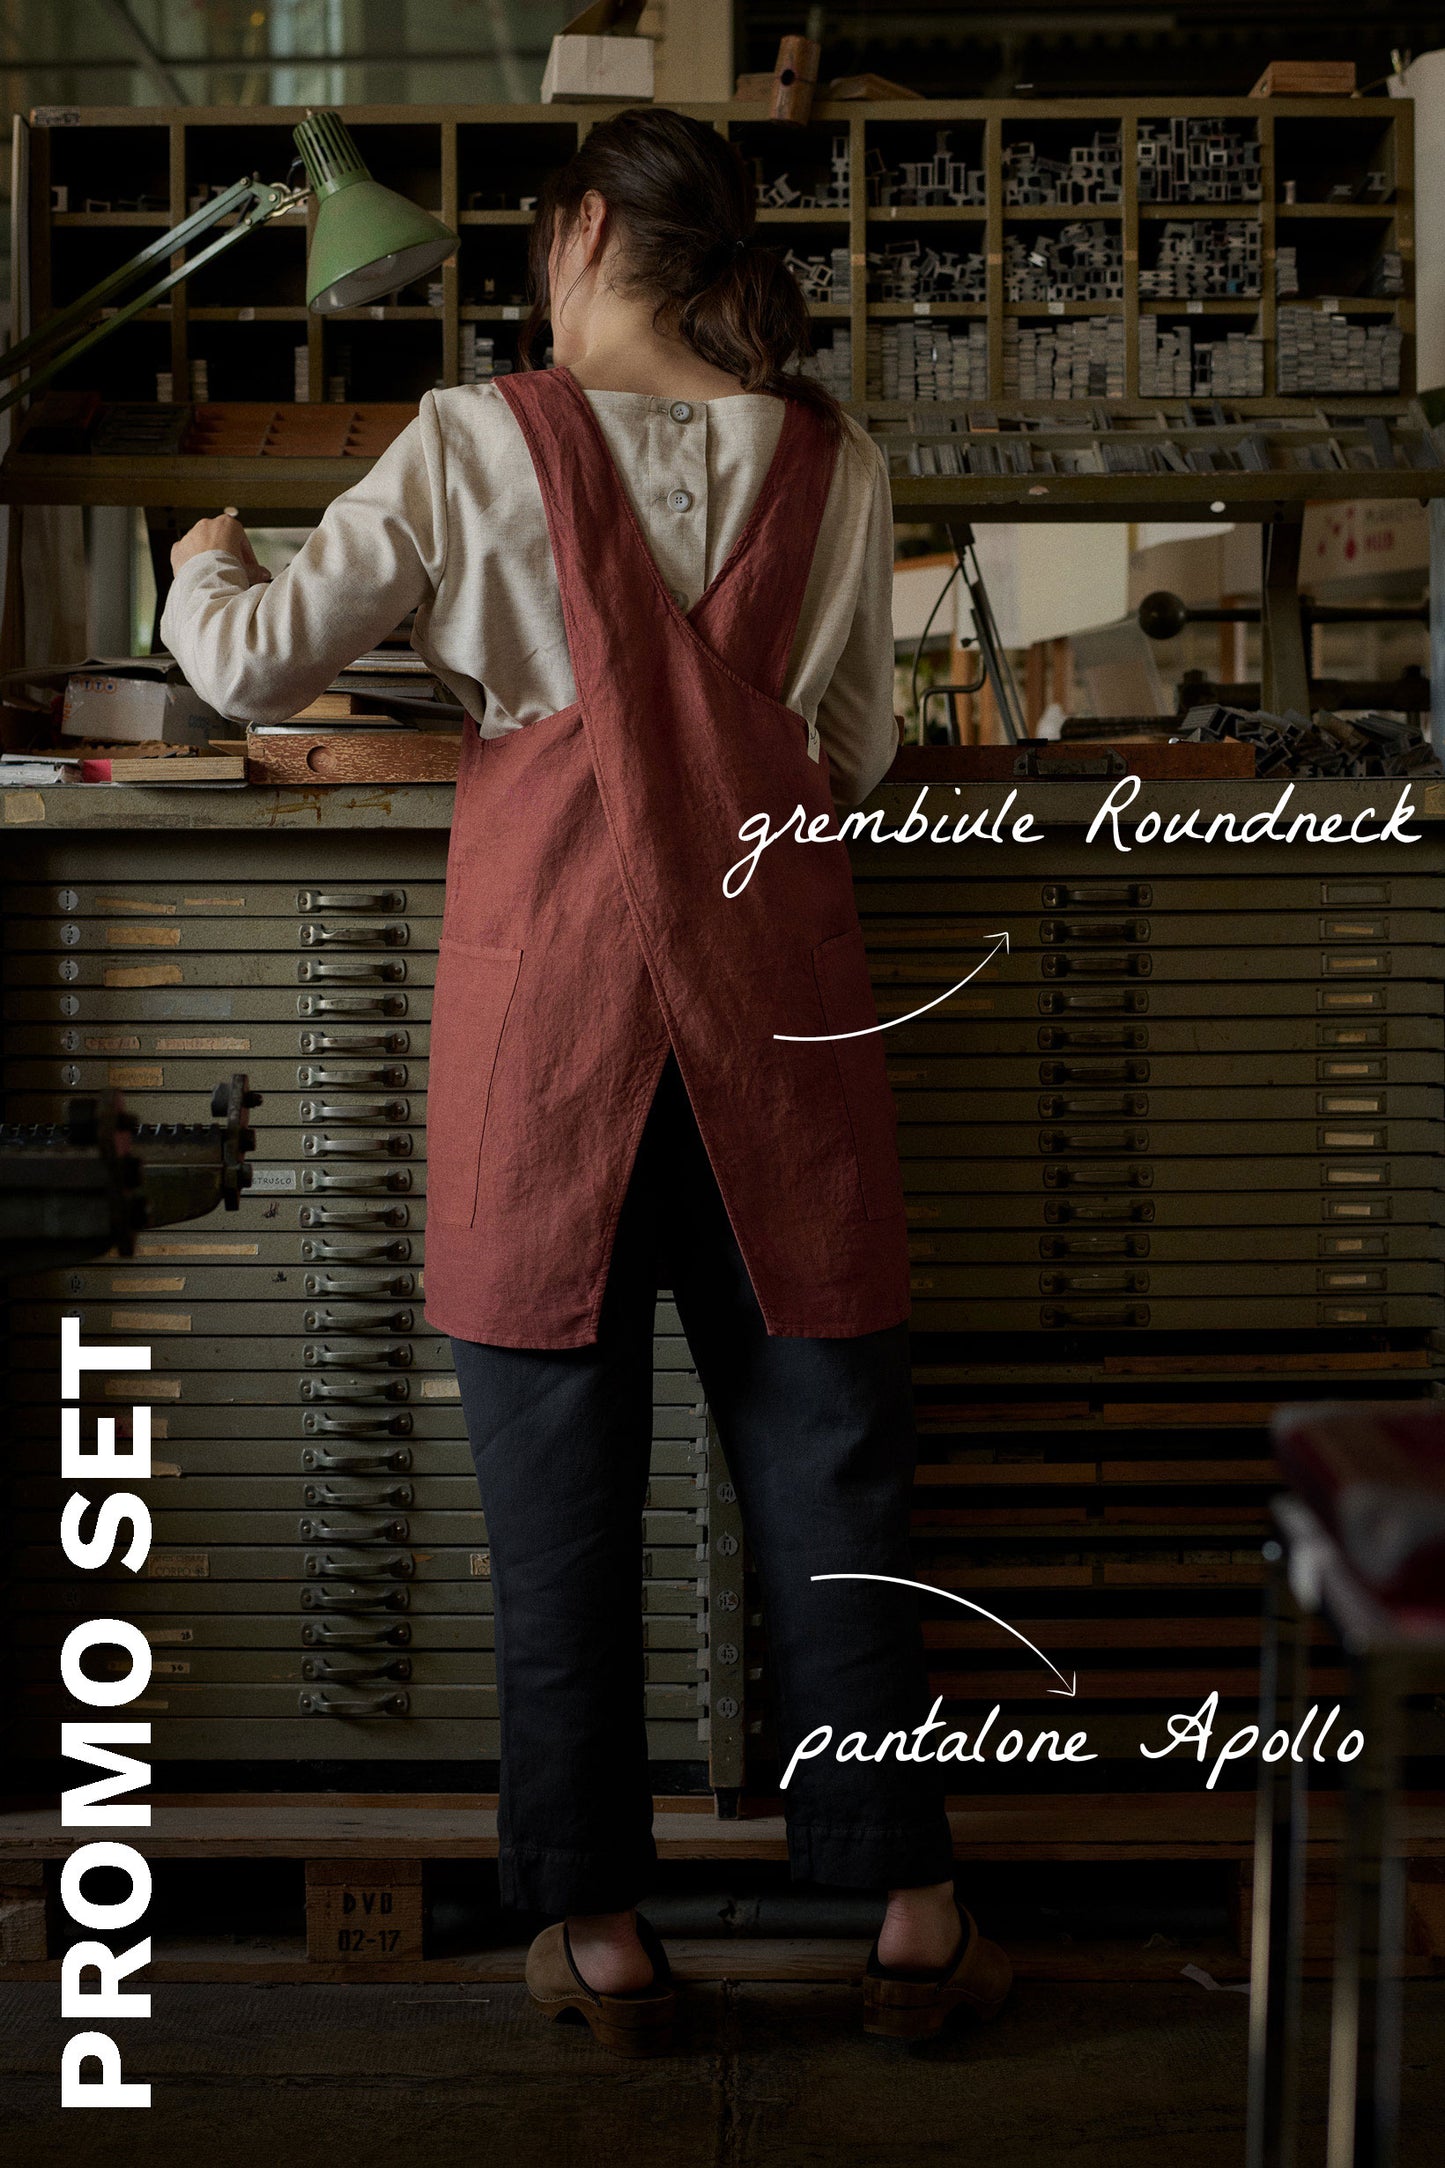 PROMO SET: Grembiule Roundneck + Pantalone Apollo - Relaxed fit